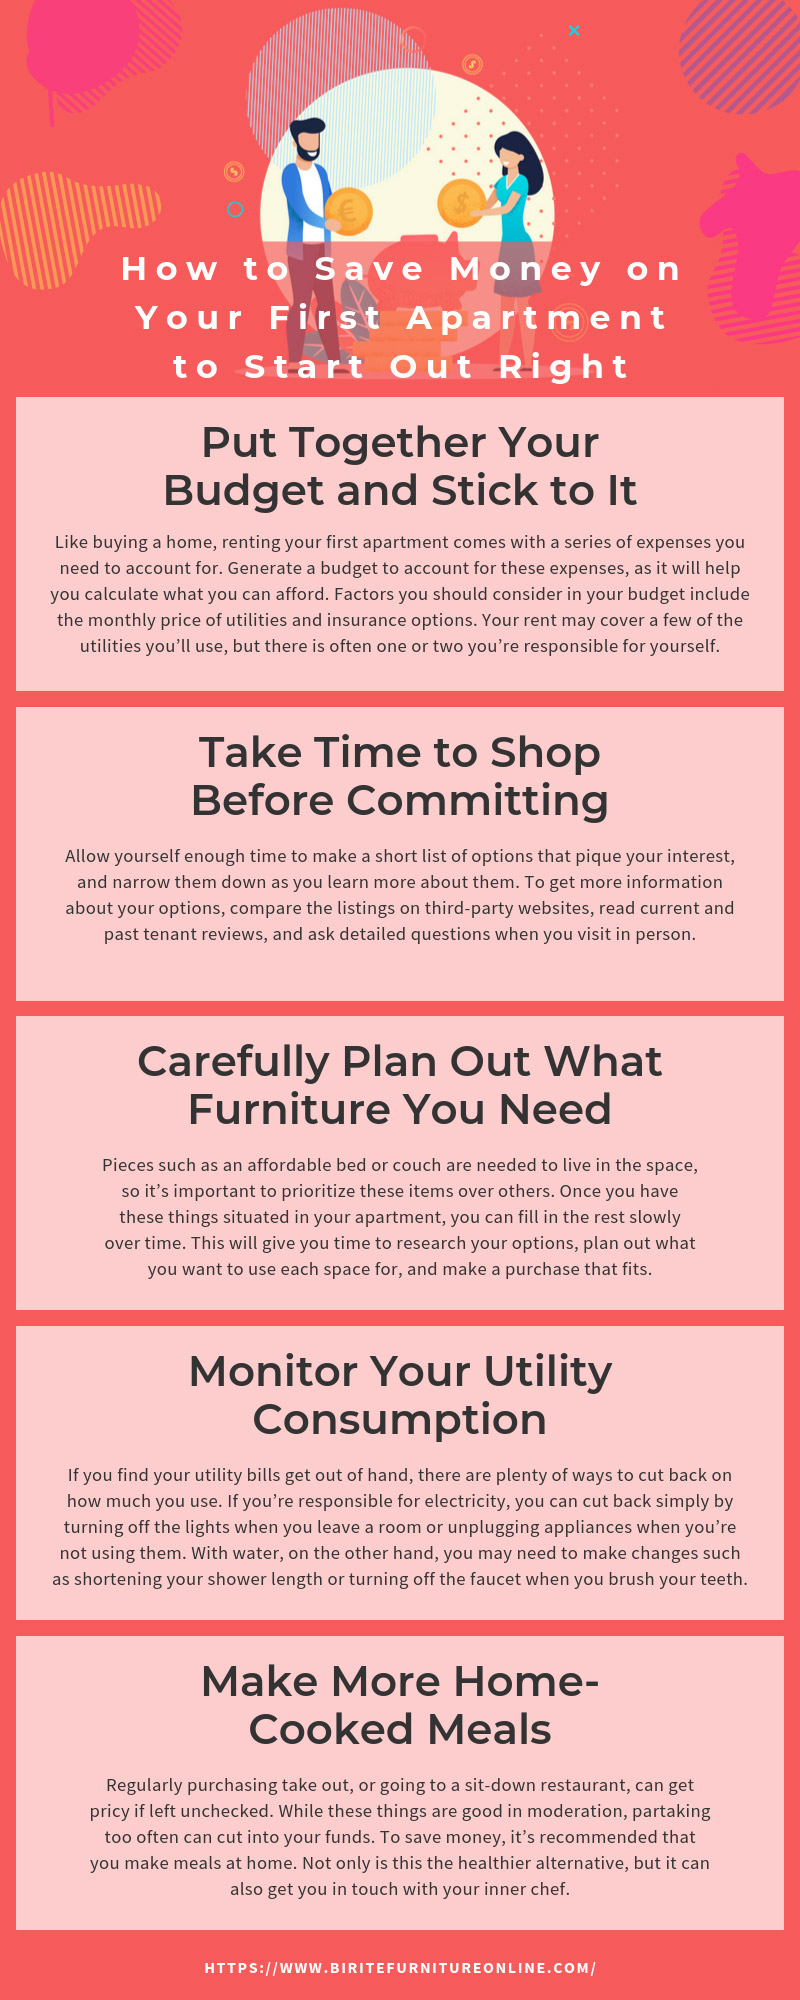 How to Save Money on Your First Apartment to Start Out Right infographic